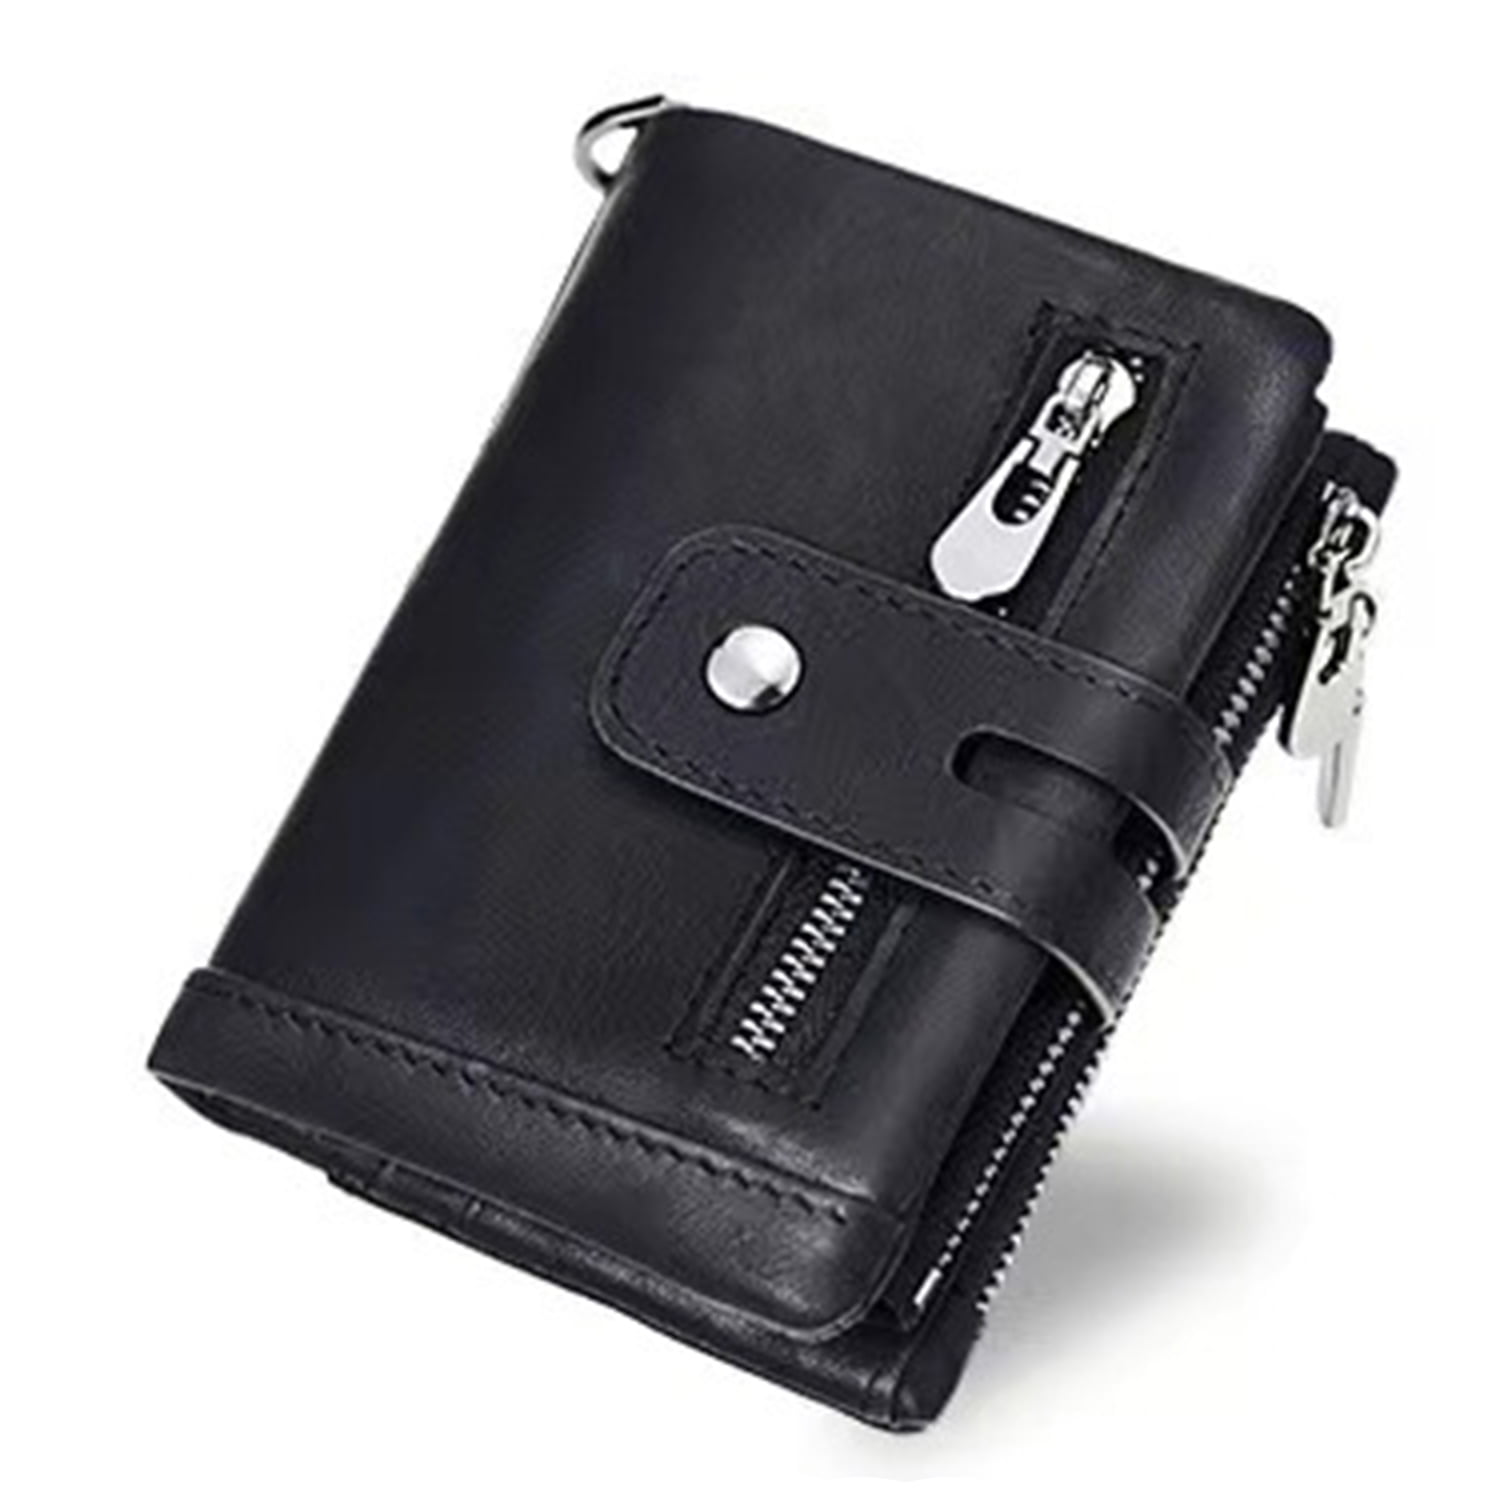 Cool Black Leather Mens Charcoal Key Wallet Coin Purse Front Pocket Wa